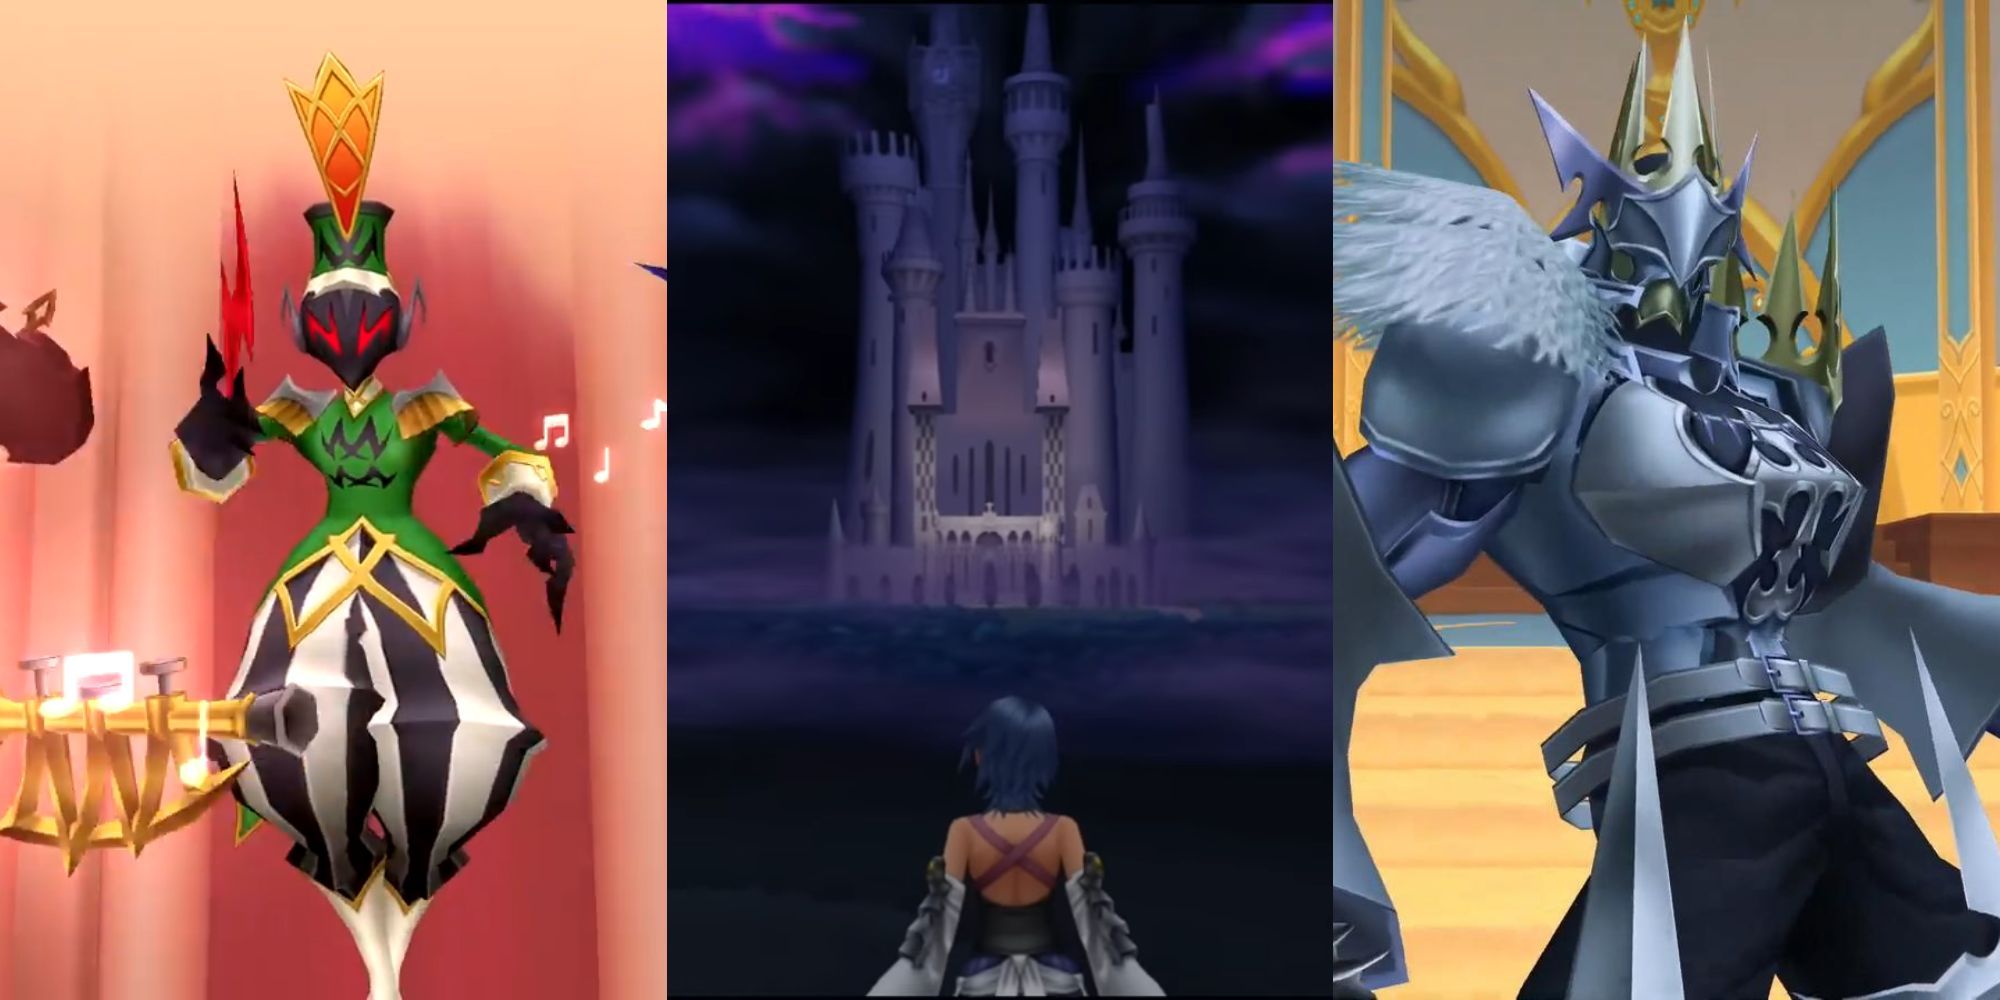 A collage of some of the key differences between the original and the Final Mix version of Birth by Sleep: The recoloring of Unversed like the Symphony Master boss, Aqua inside the Realm of Darkness in the Secret Episode and one of the new 3 optional bosses: No Heart.